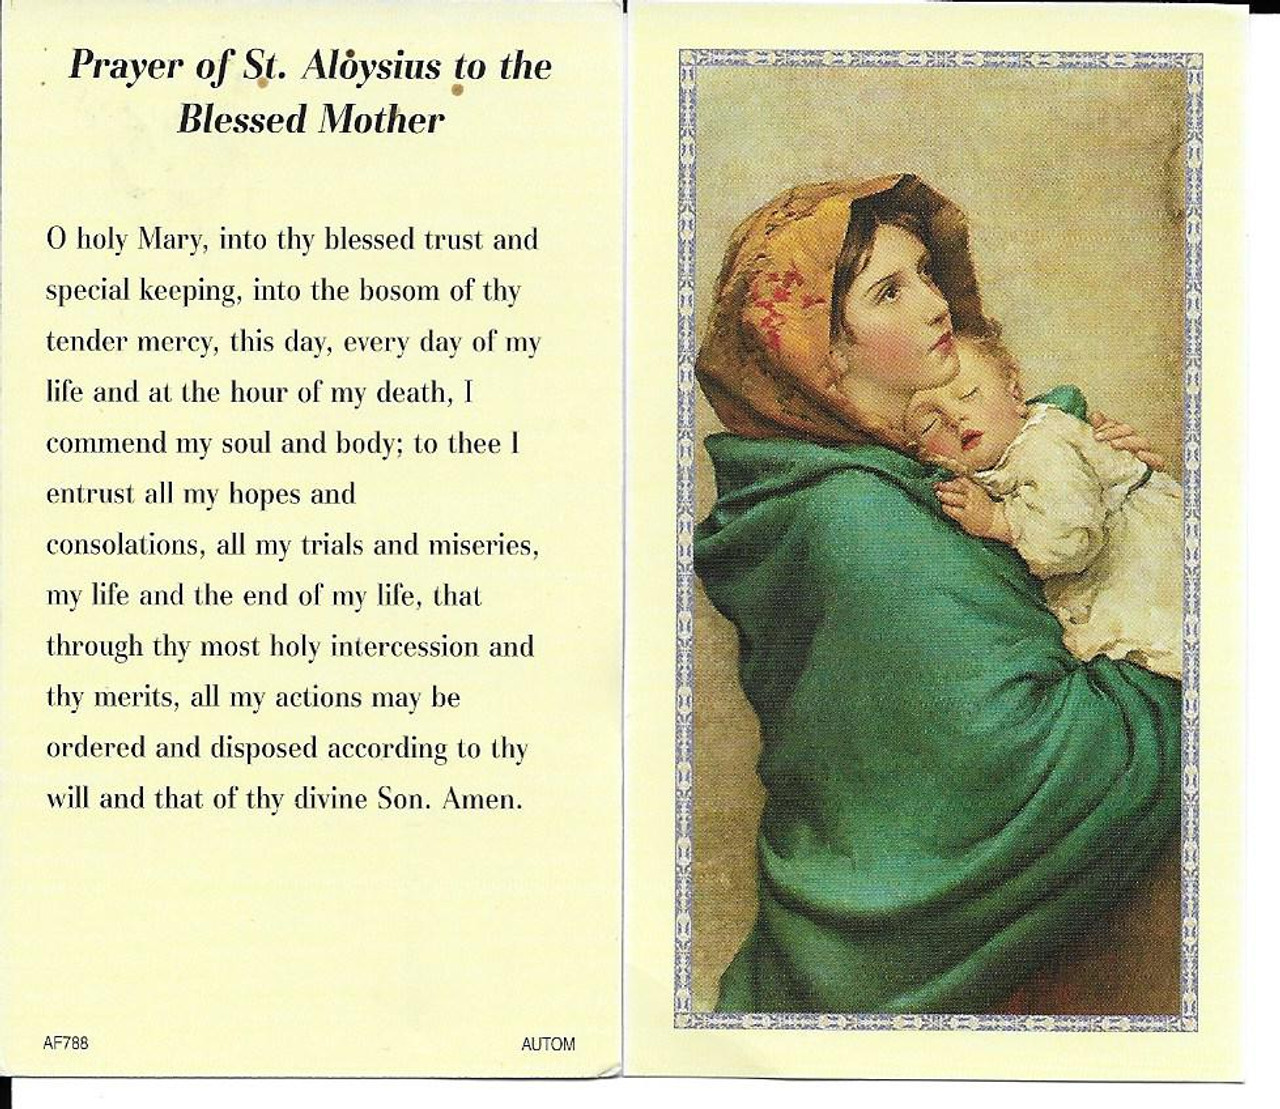 50 cent Prayer Cards “Prayer of Saint Aloysius to the Blessed Mother”